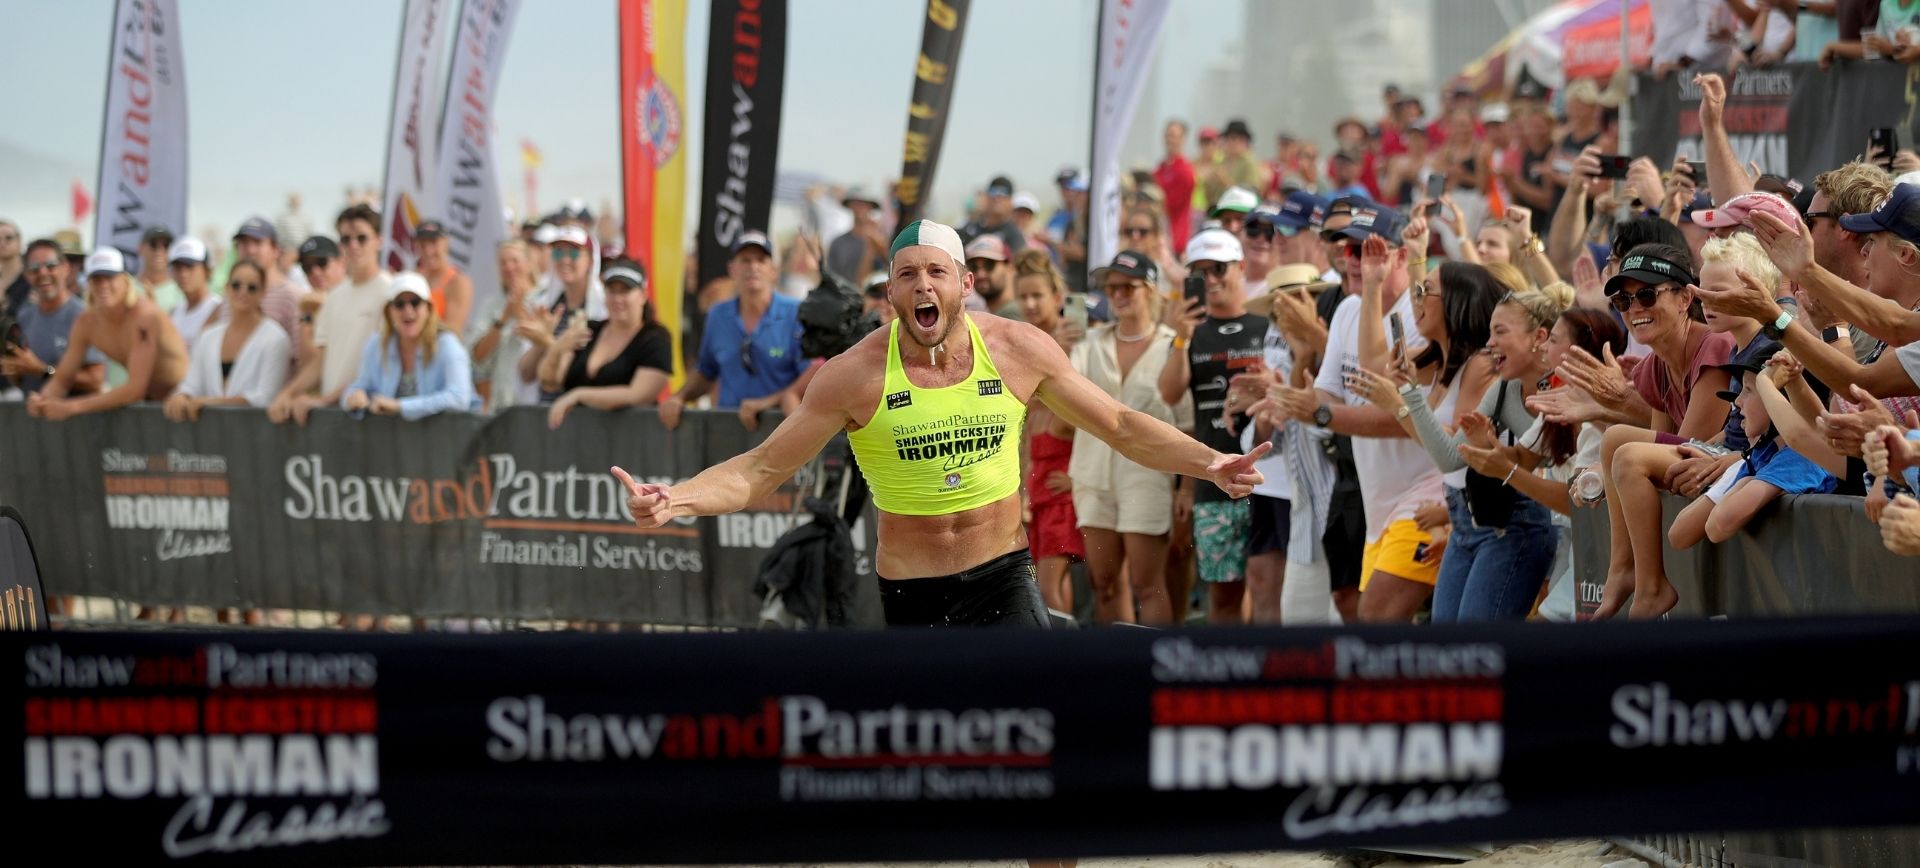 Shaw and Partners Shannon Eckstein Ironman Classic